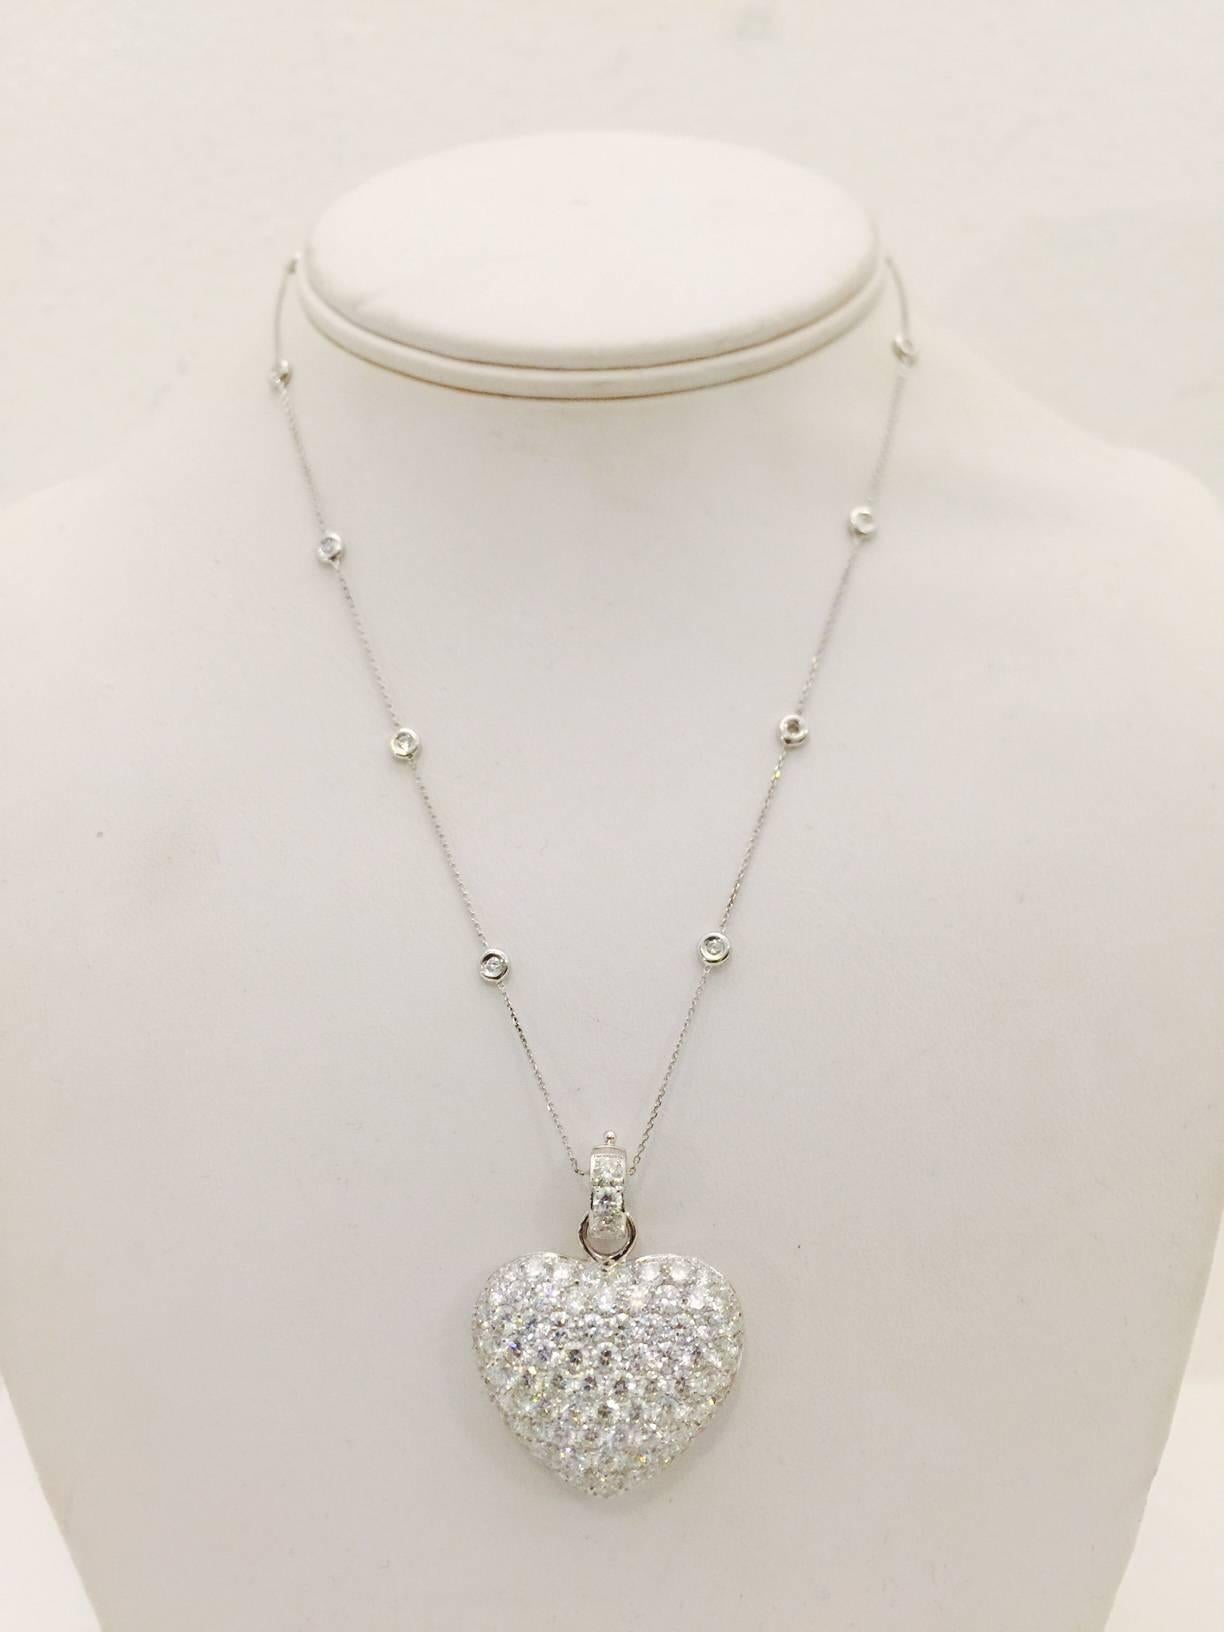 Breathtaking!  Intricately crafted in 18 karat white gold, this necklace has it all!  Beautifully matched round diamonds cover the front and bale with a combined total weight of 8.80 carats.  E color and VVS1 clarity speak for themselves.  The bale